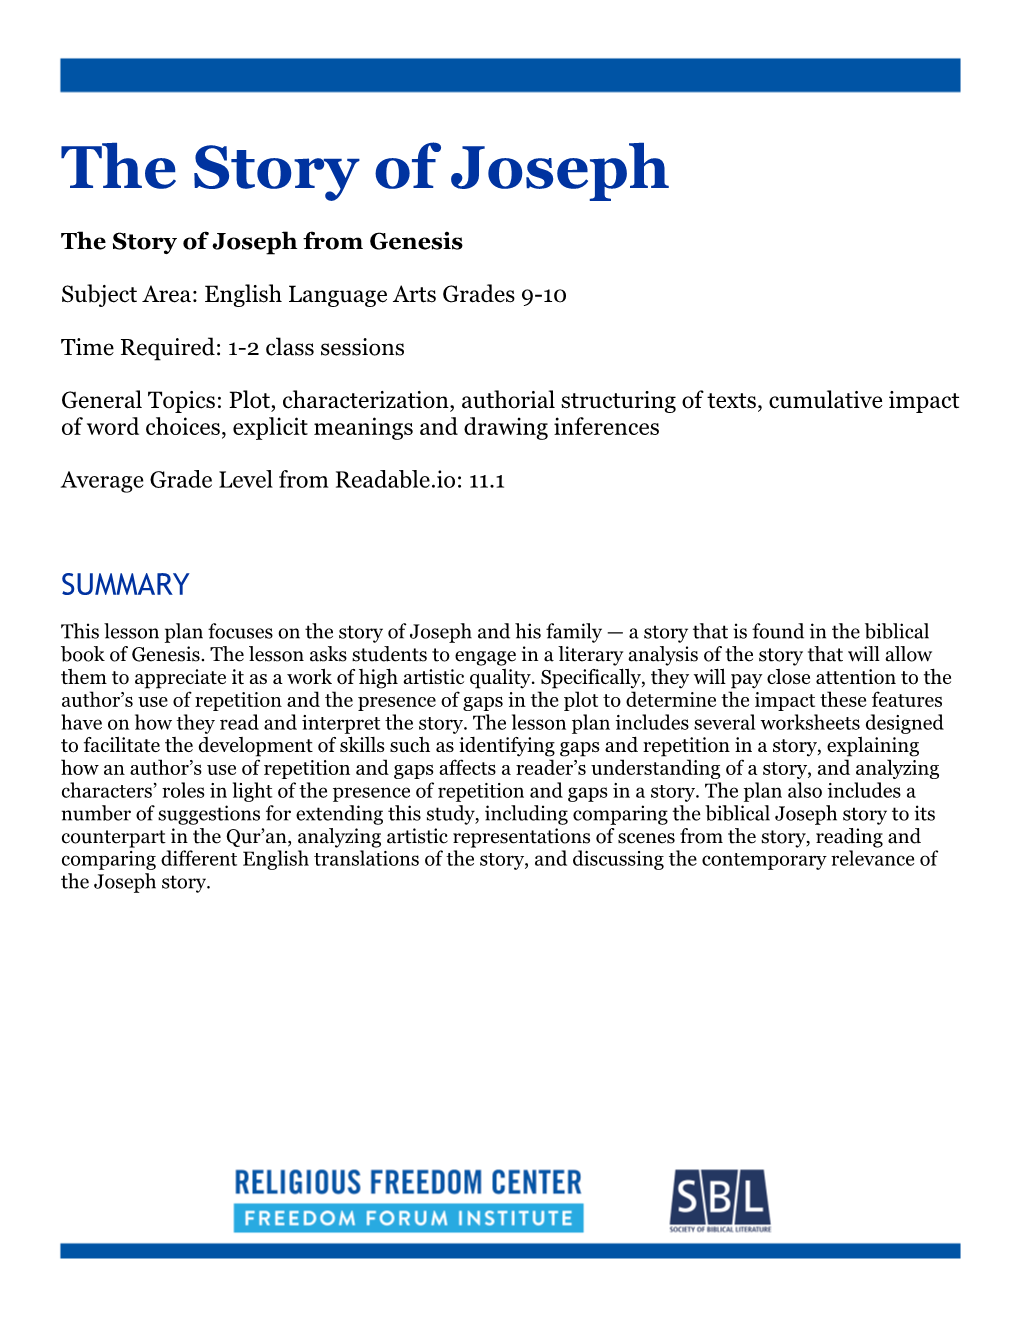 The Story of Joseph from Genesis